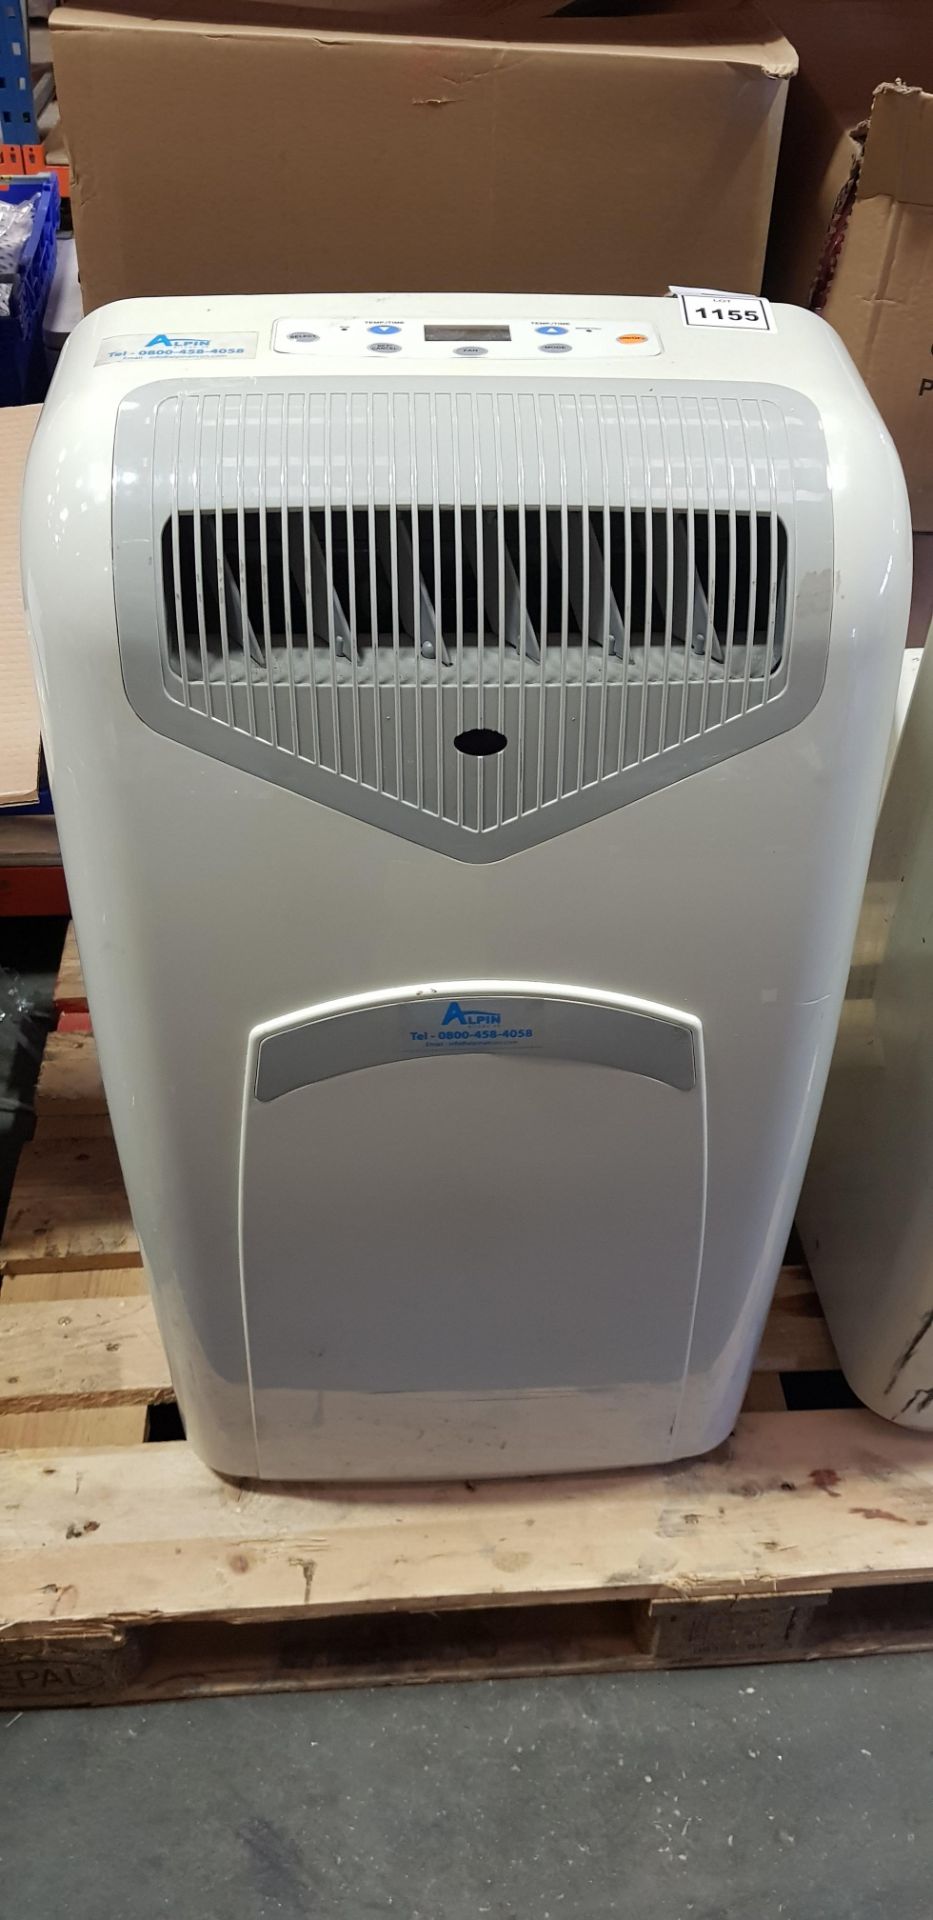 1 X PORTABLE AIR CONDITIONING UNIT MODEL NUMBER - KY-35